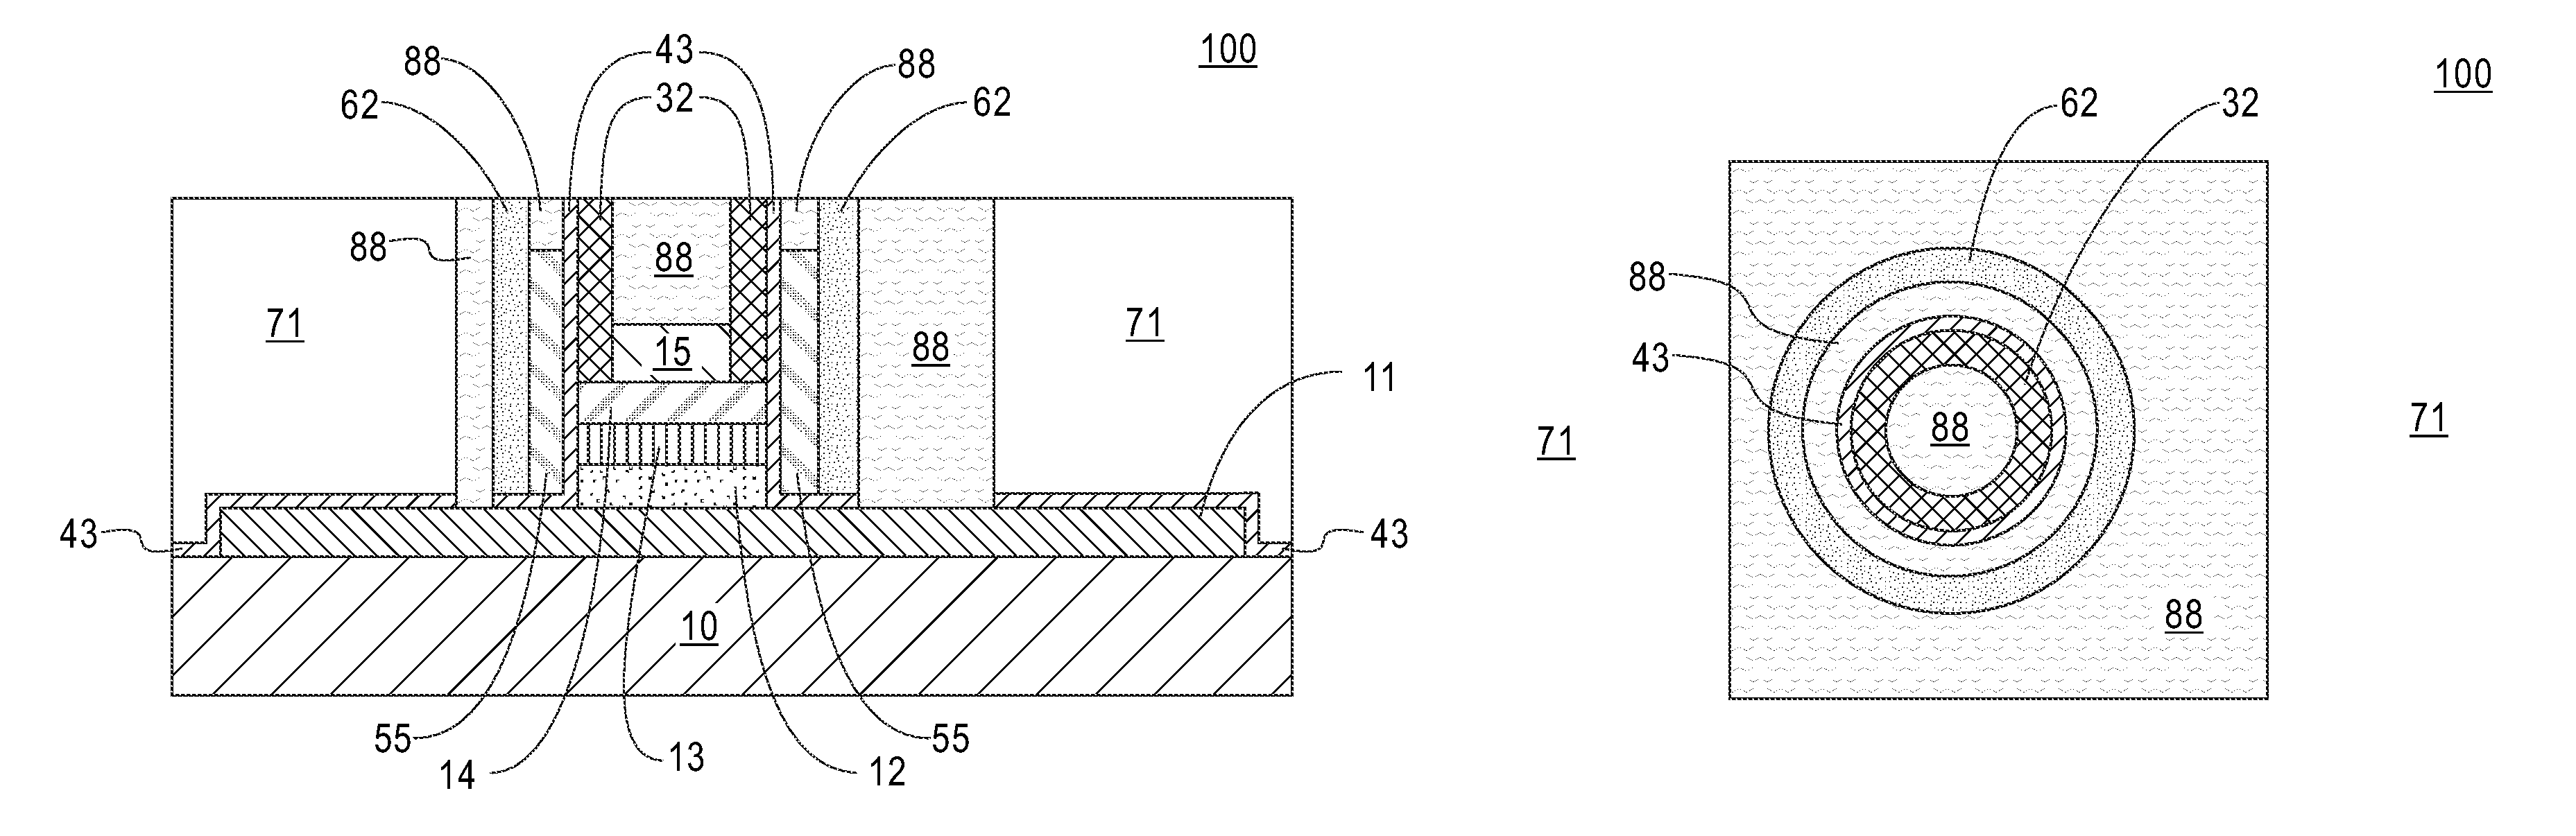 Vertical field effect transistors with controlled overlap between gate electrode and source/drain contacts